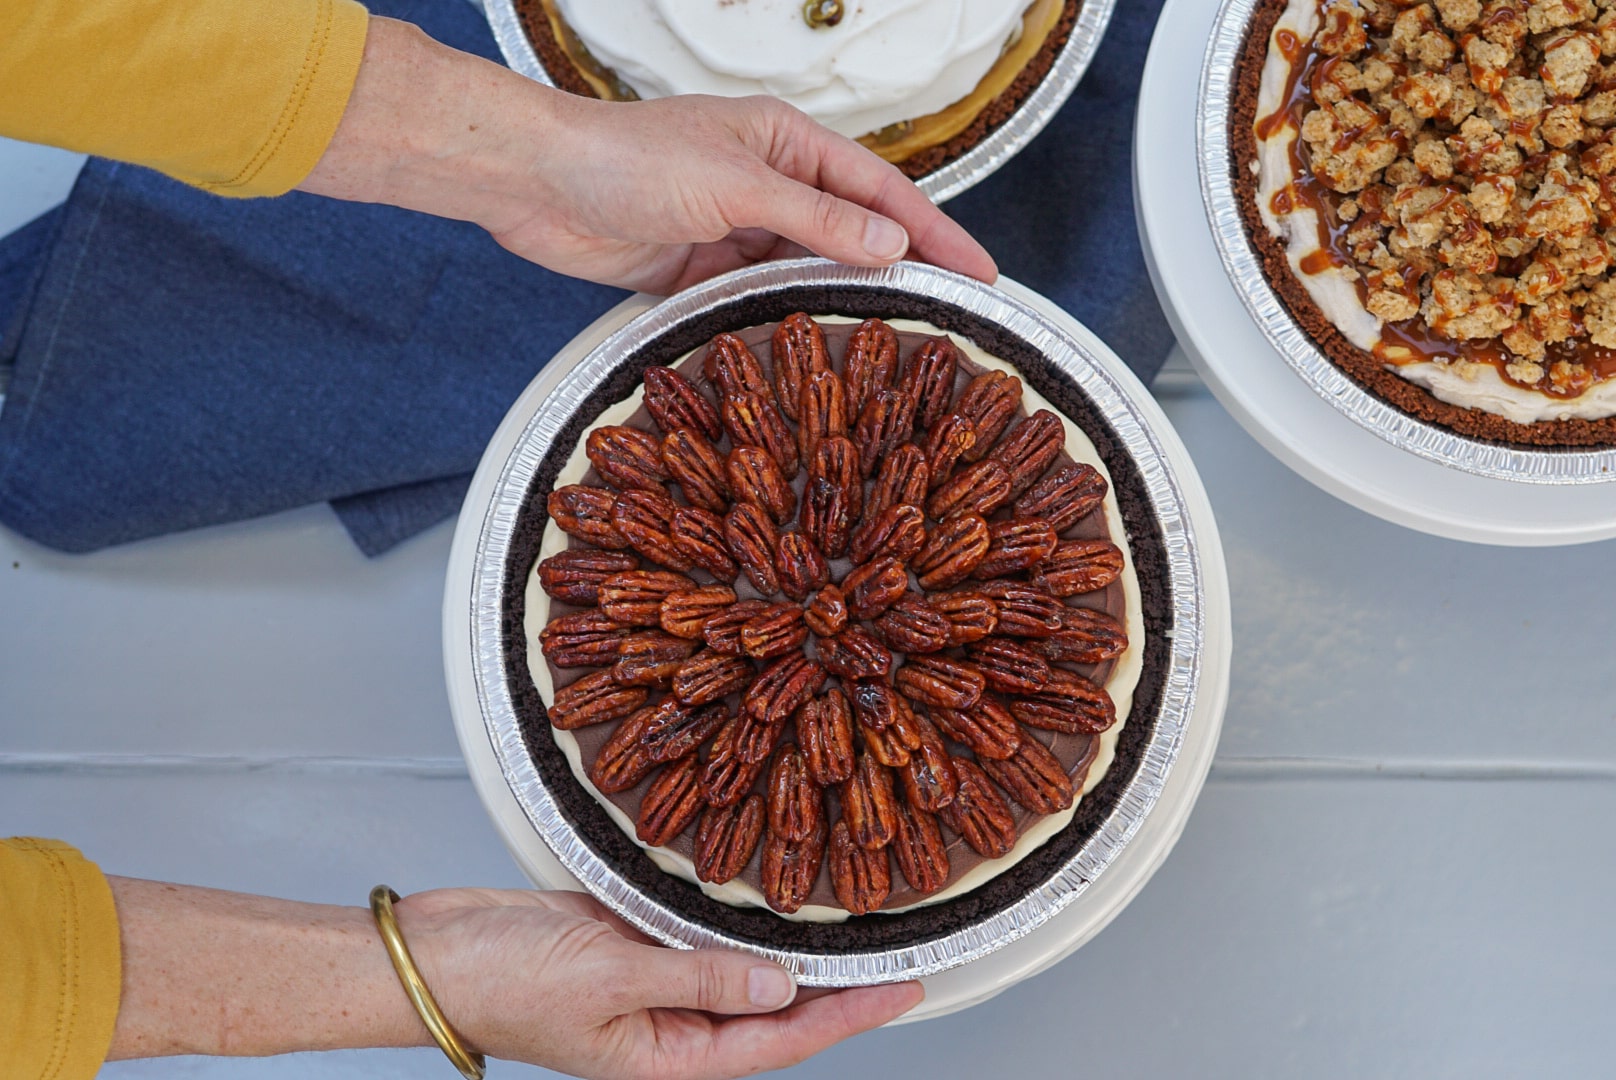 Satisfy your sweet tooth with a decadent Pecan Ice Cream Pie from Sweet Rose Creamery.